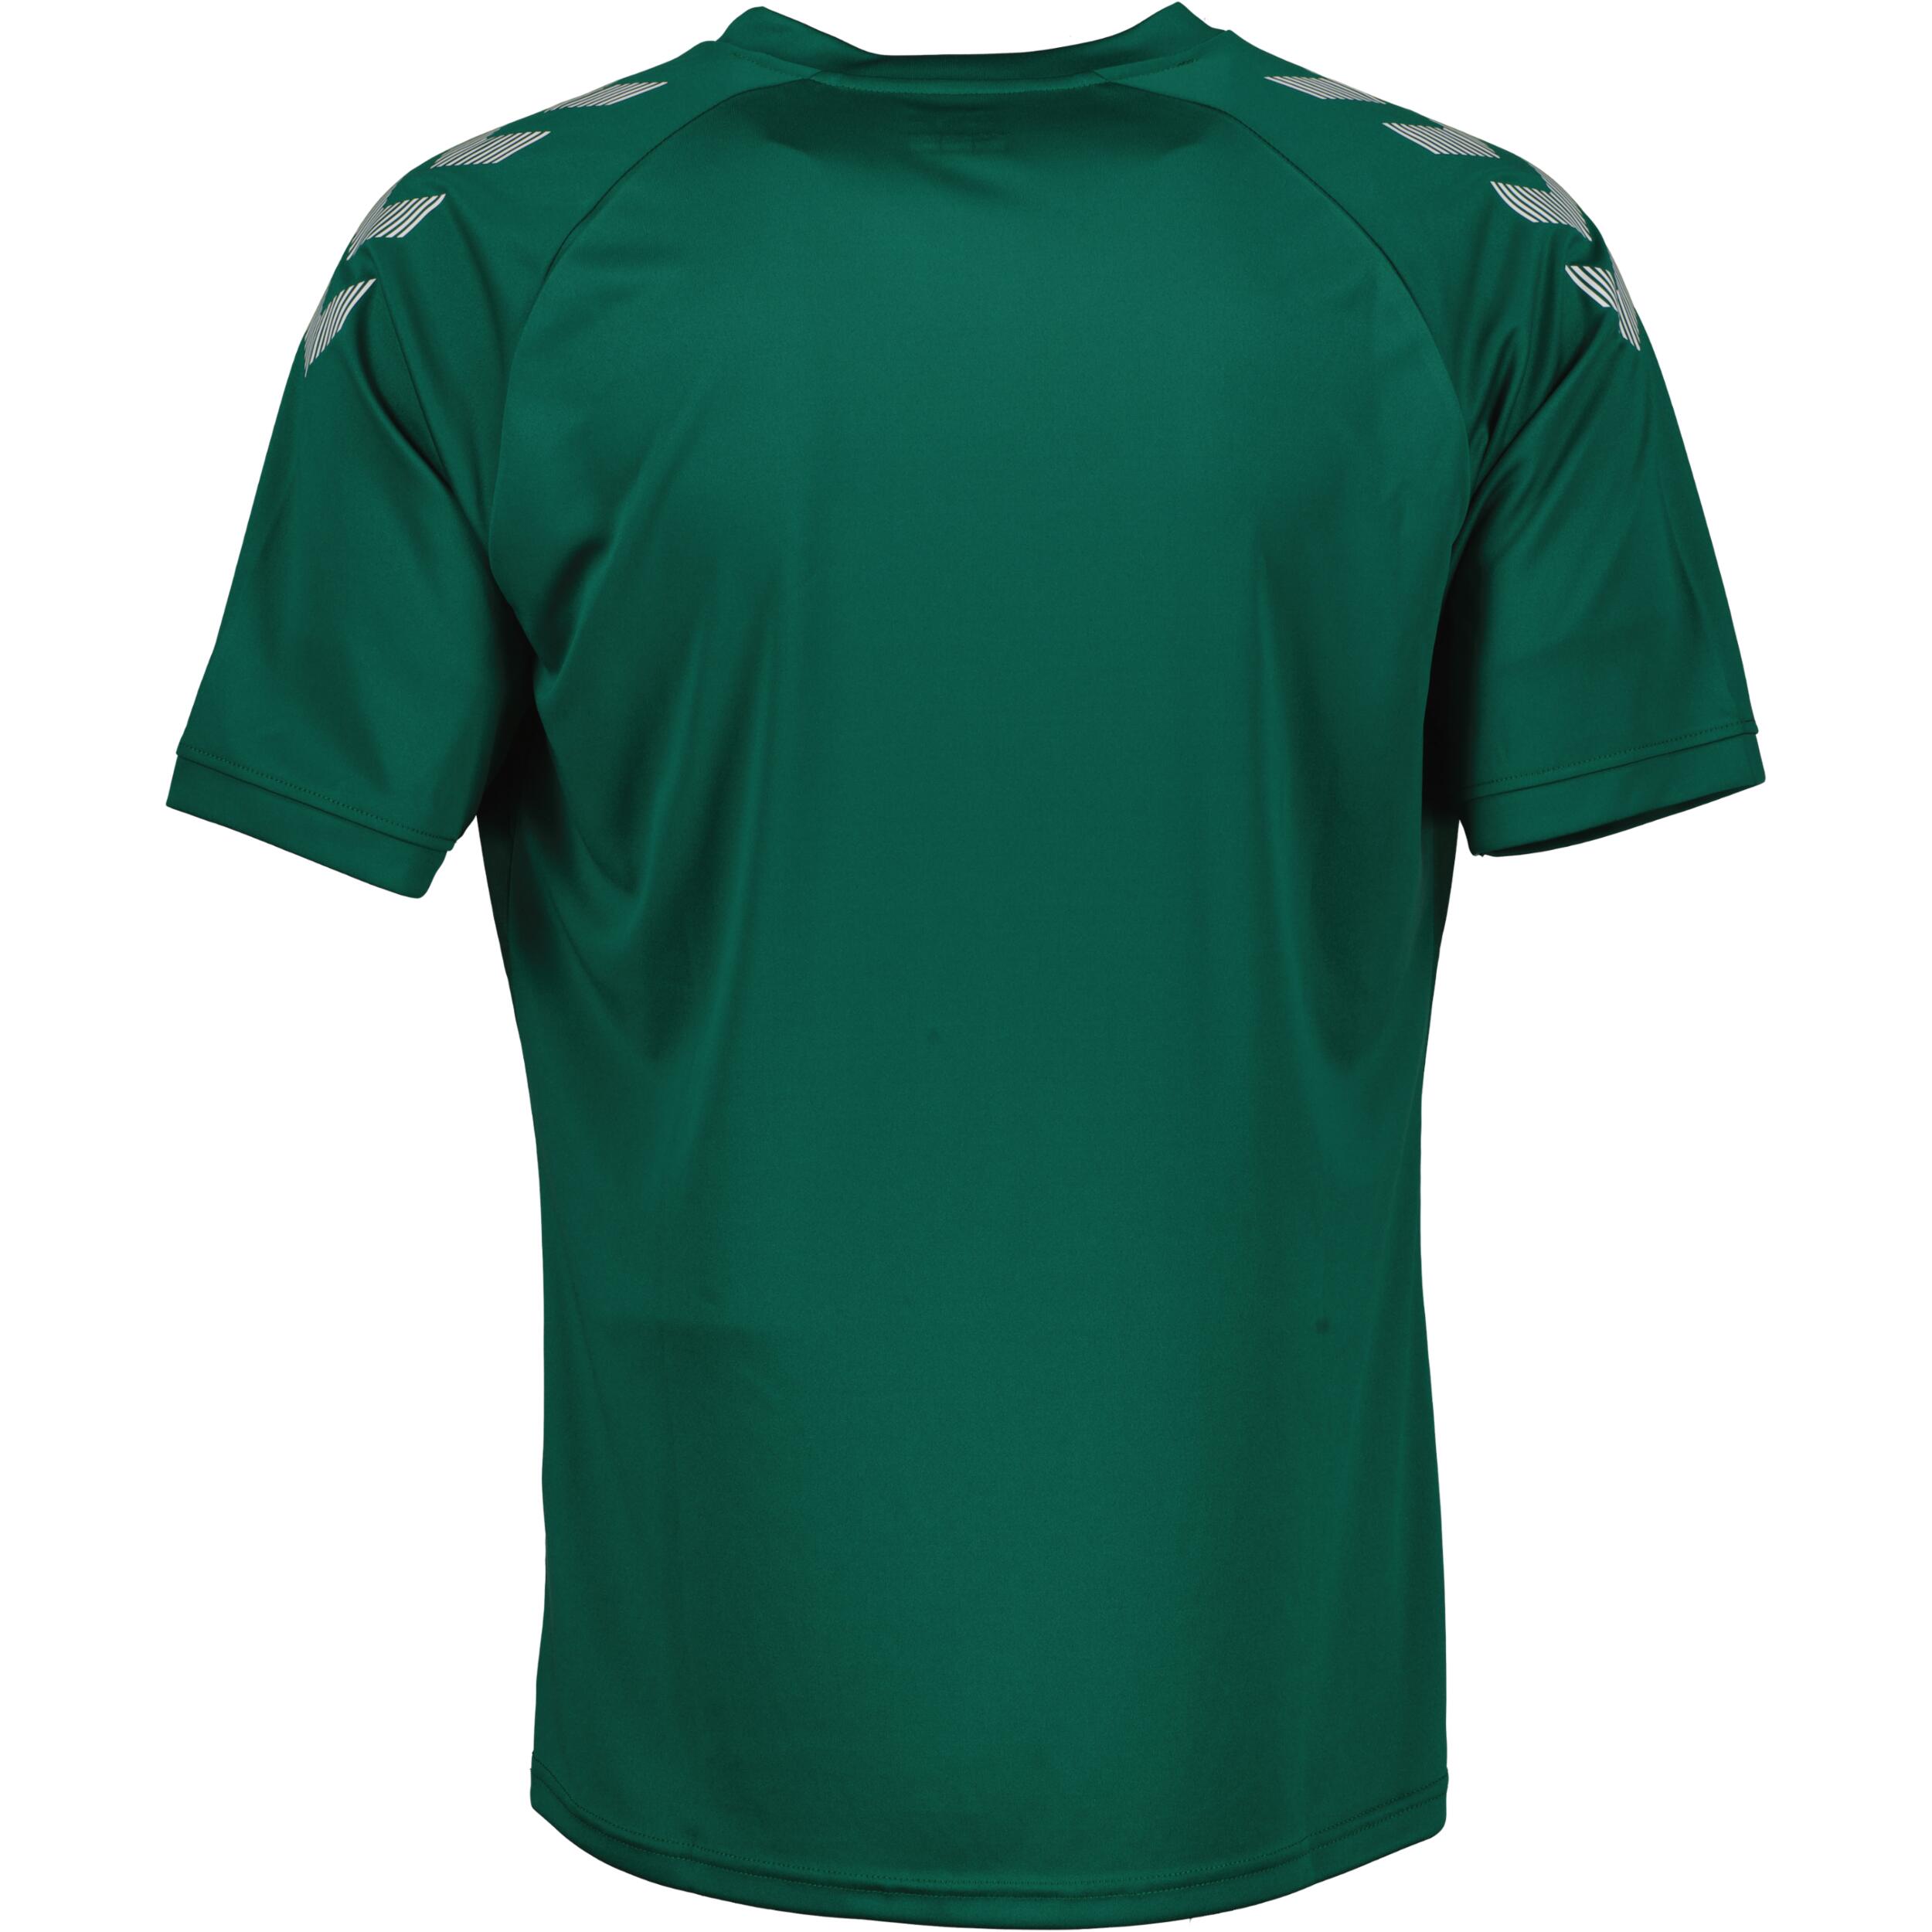 Poly jersey for men, great for football, in evergreen 2/3